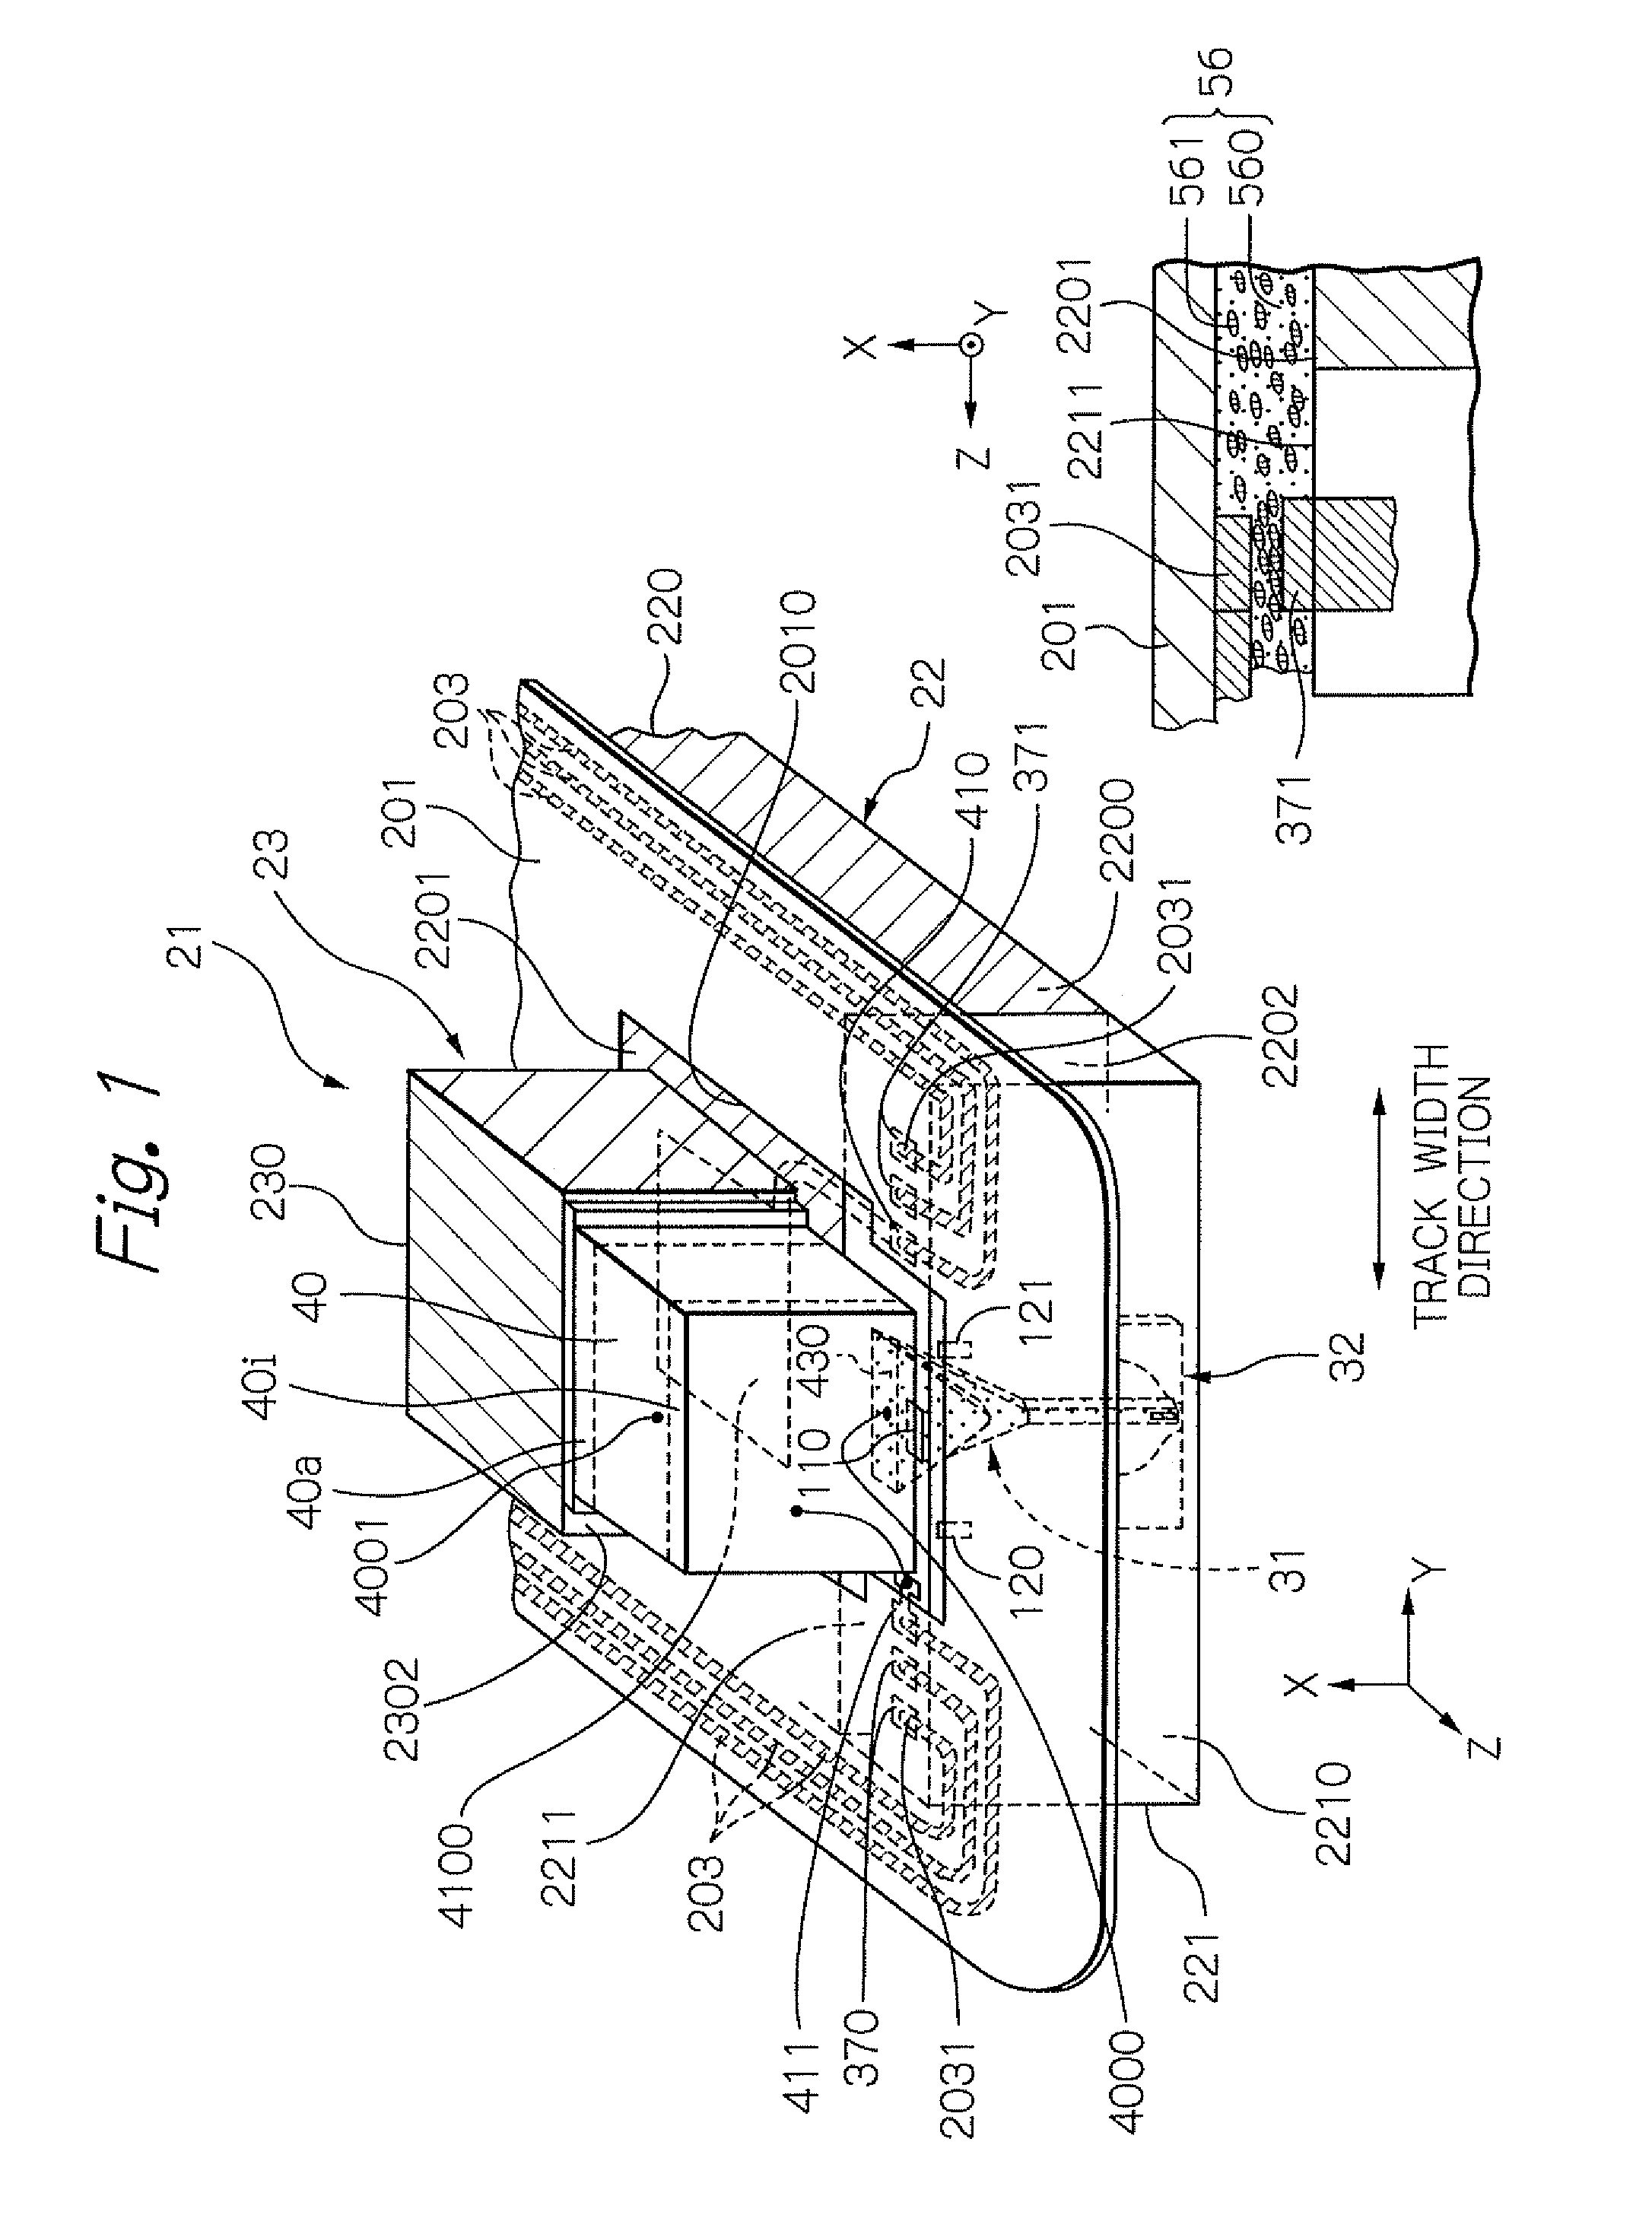 Method for manufacturing thermally-assisted magnetic recording head by semi-active alignment